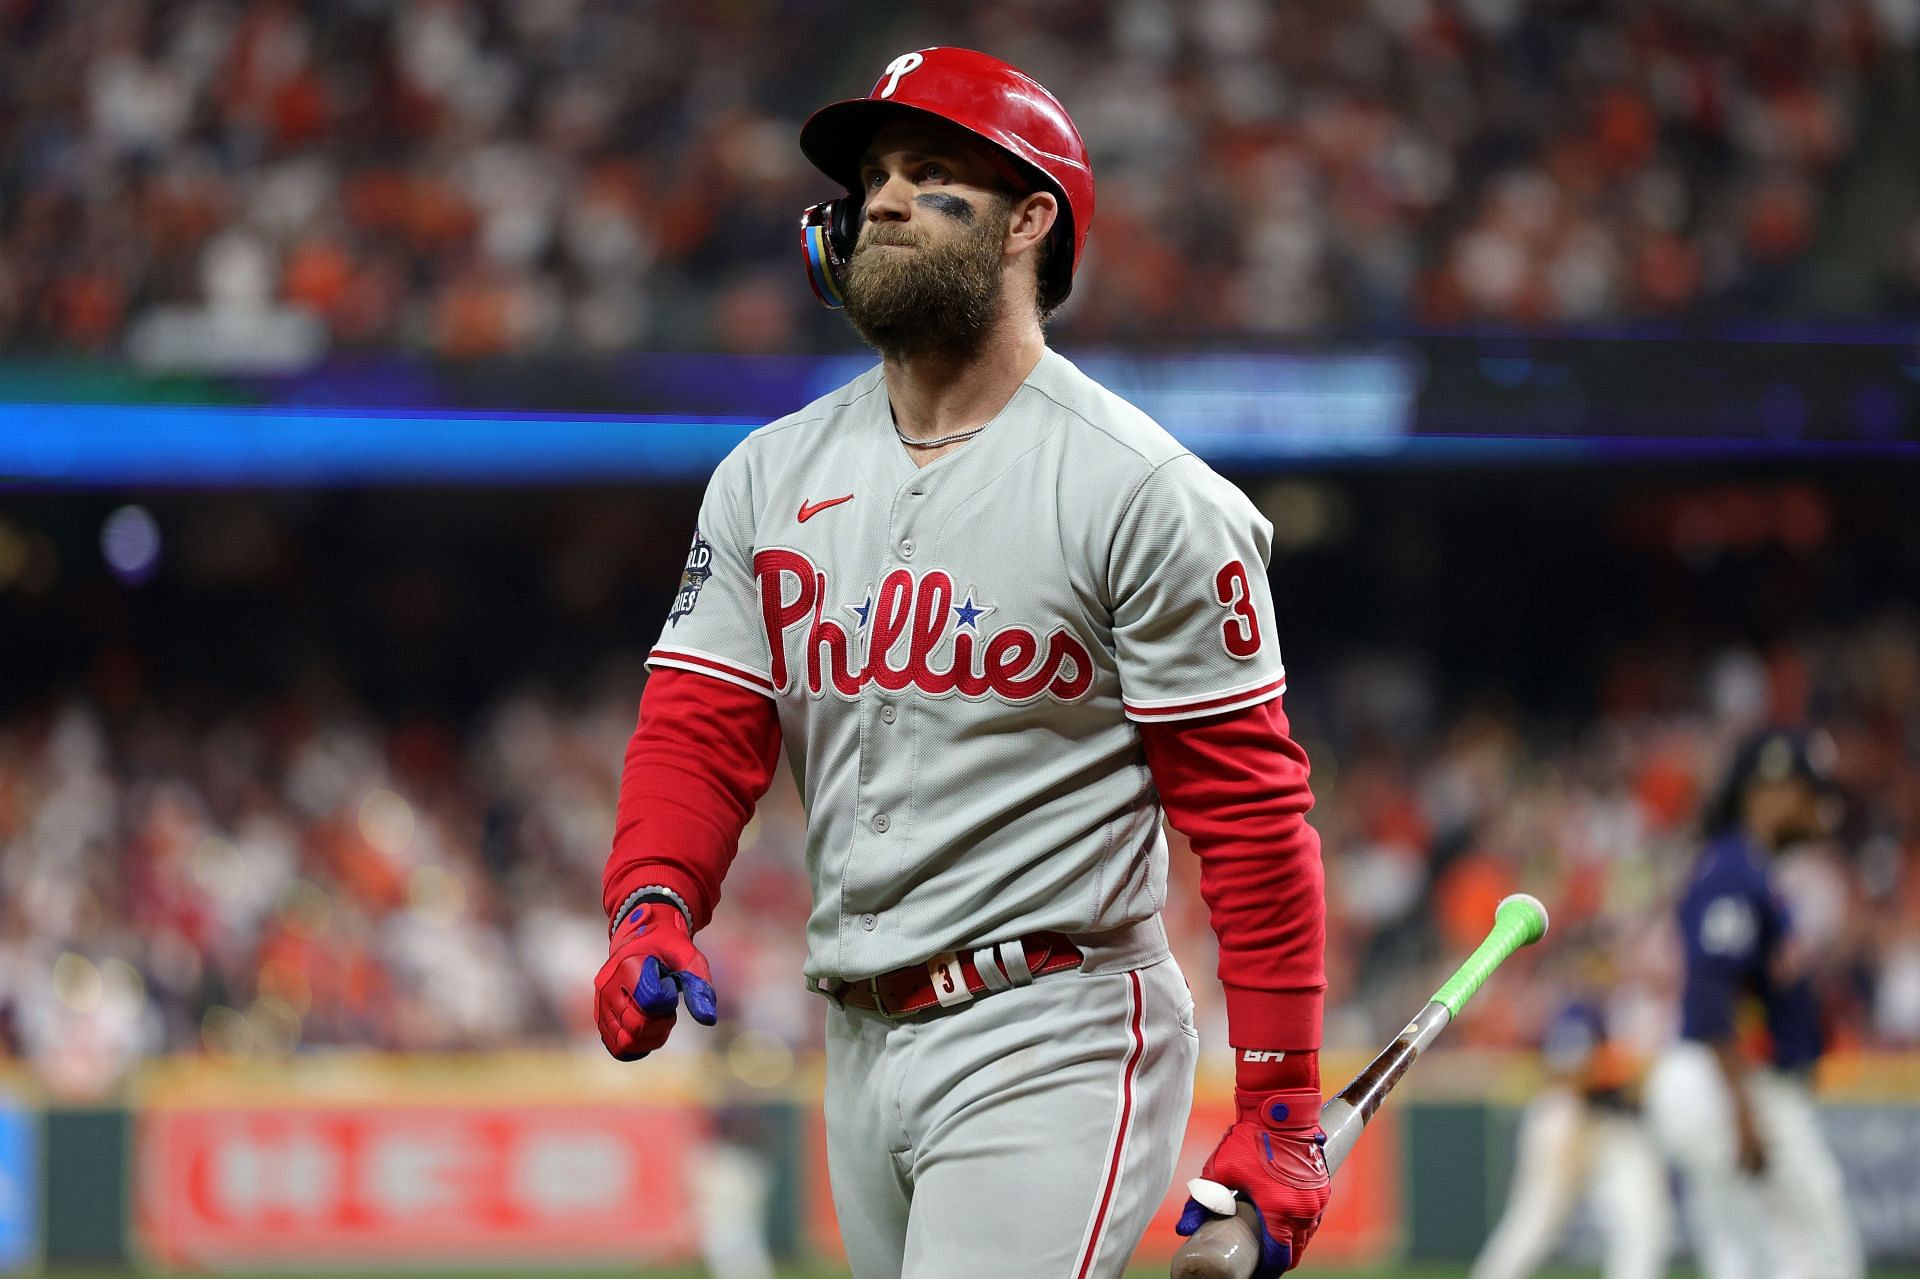 How Phillies' Bryce Harper's 2021 compares to his 2015 MVP season